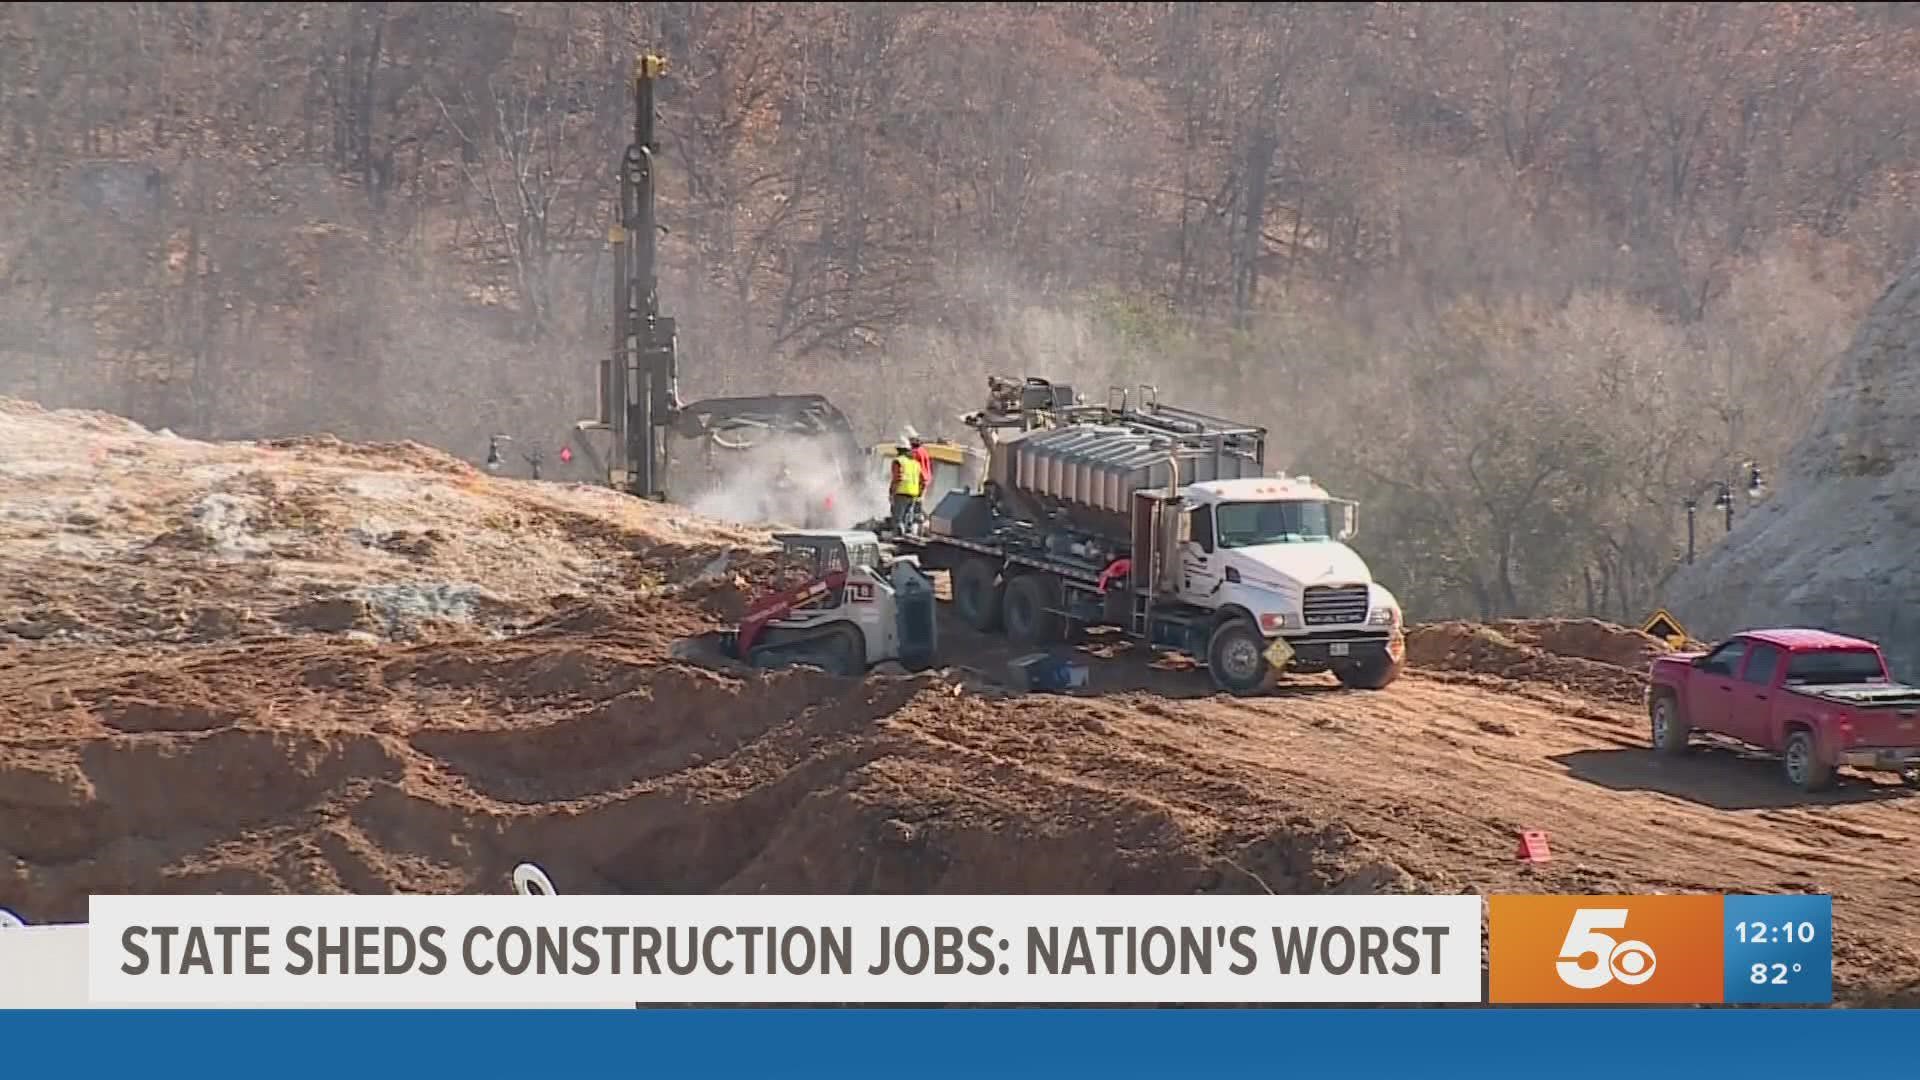 According to a new analysis by the Associated General Contractors of America, Arkansas construction jobs are on the decline, ranking the state last in the nation.